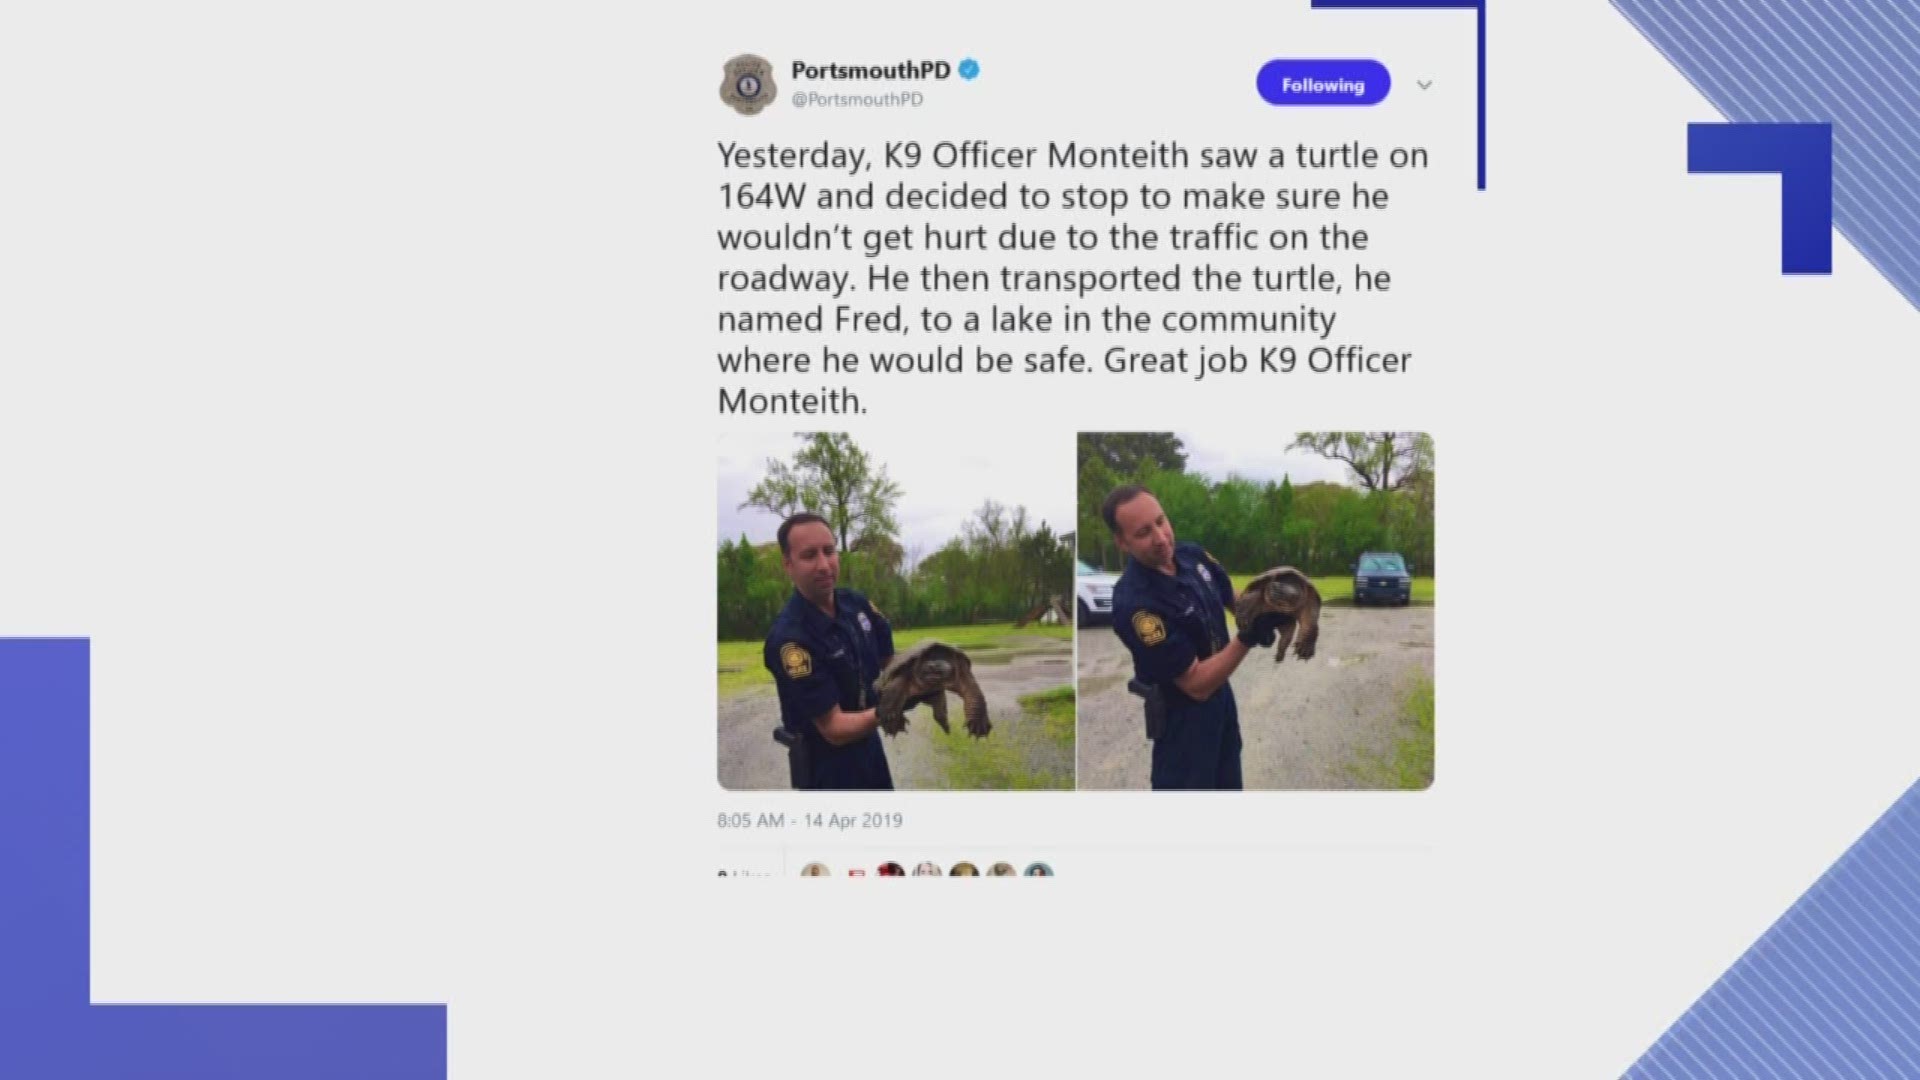 K9 Officer Monteith saw the turtle on Route 164 West in Portsmouth and stopped to ensure it wasn't hurt or hit by traffic.